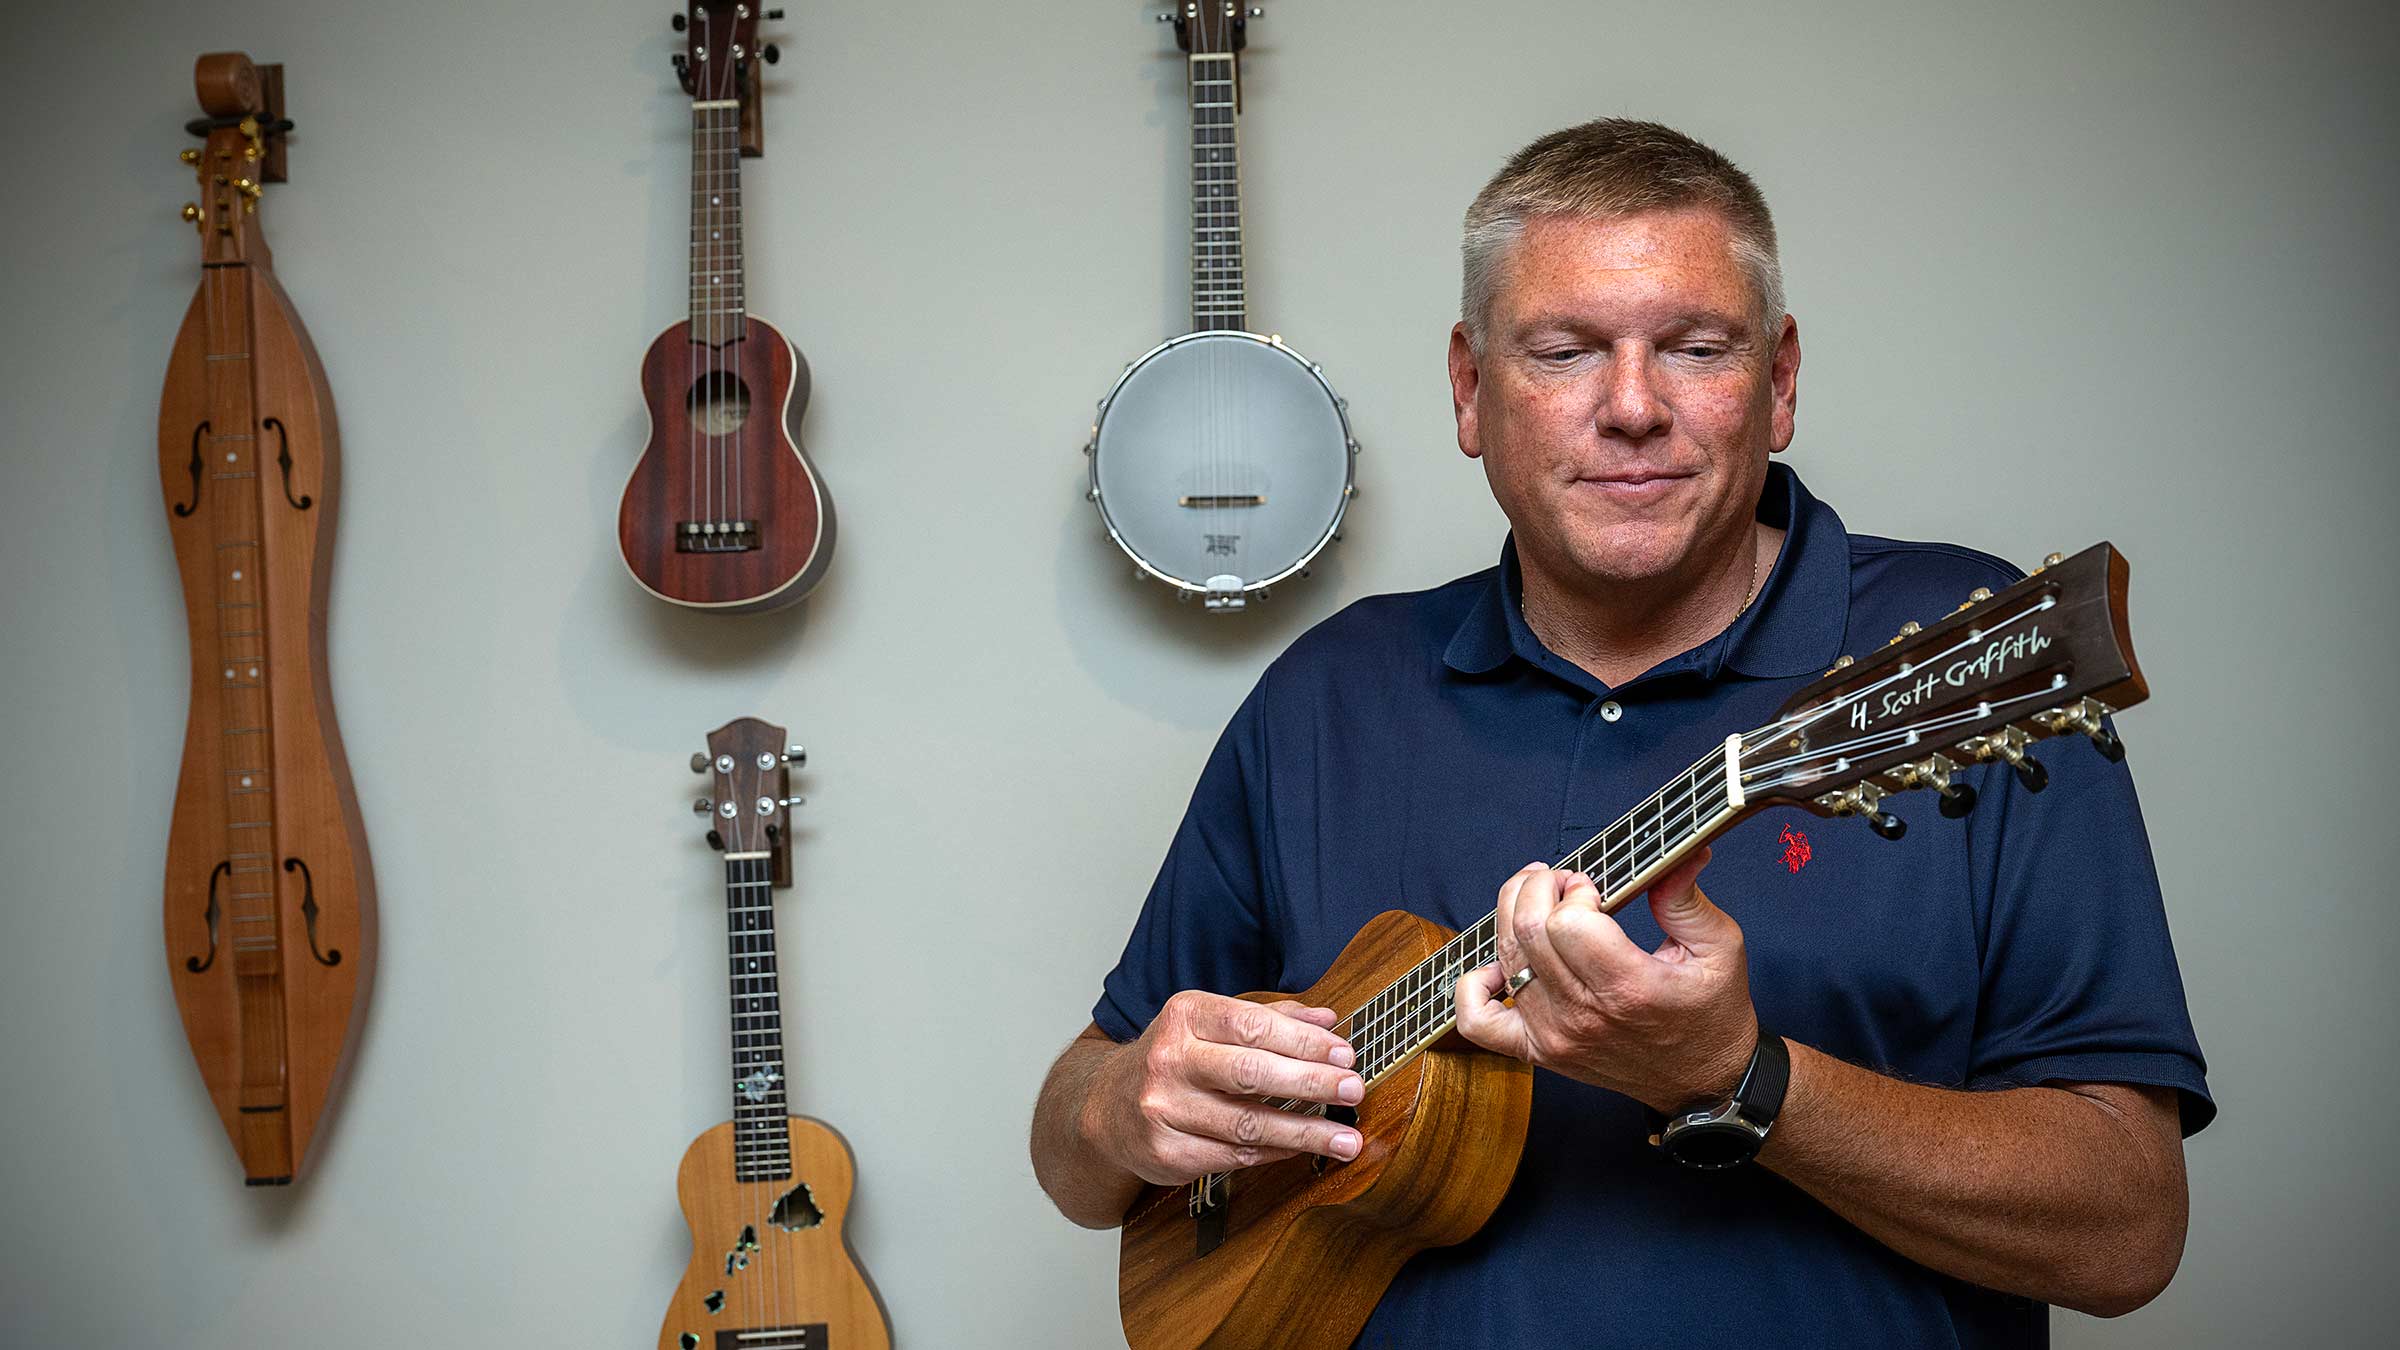 Scott Griffith standing in front of his ukulele collection